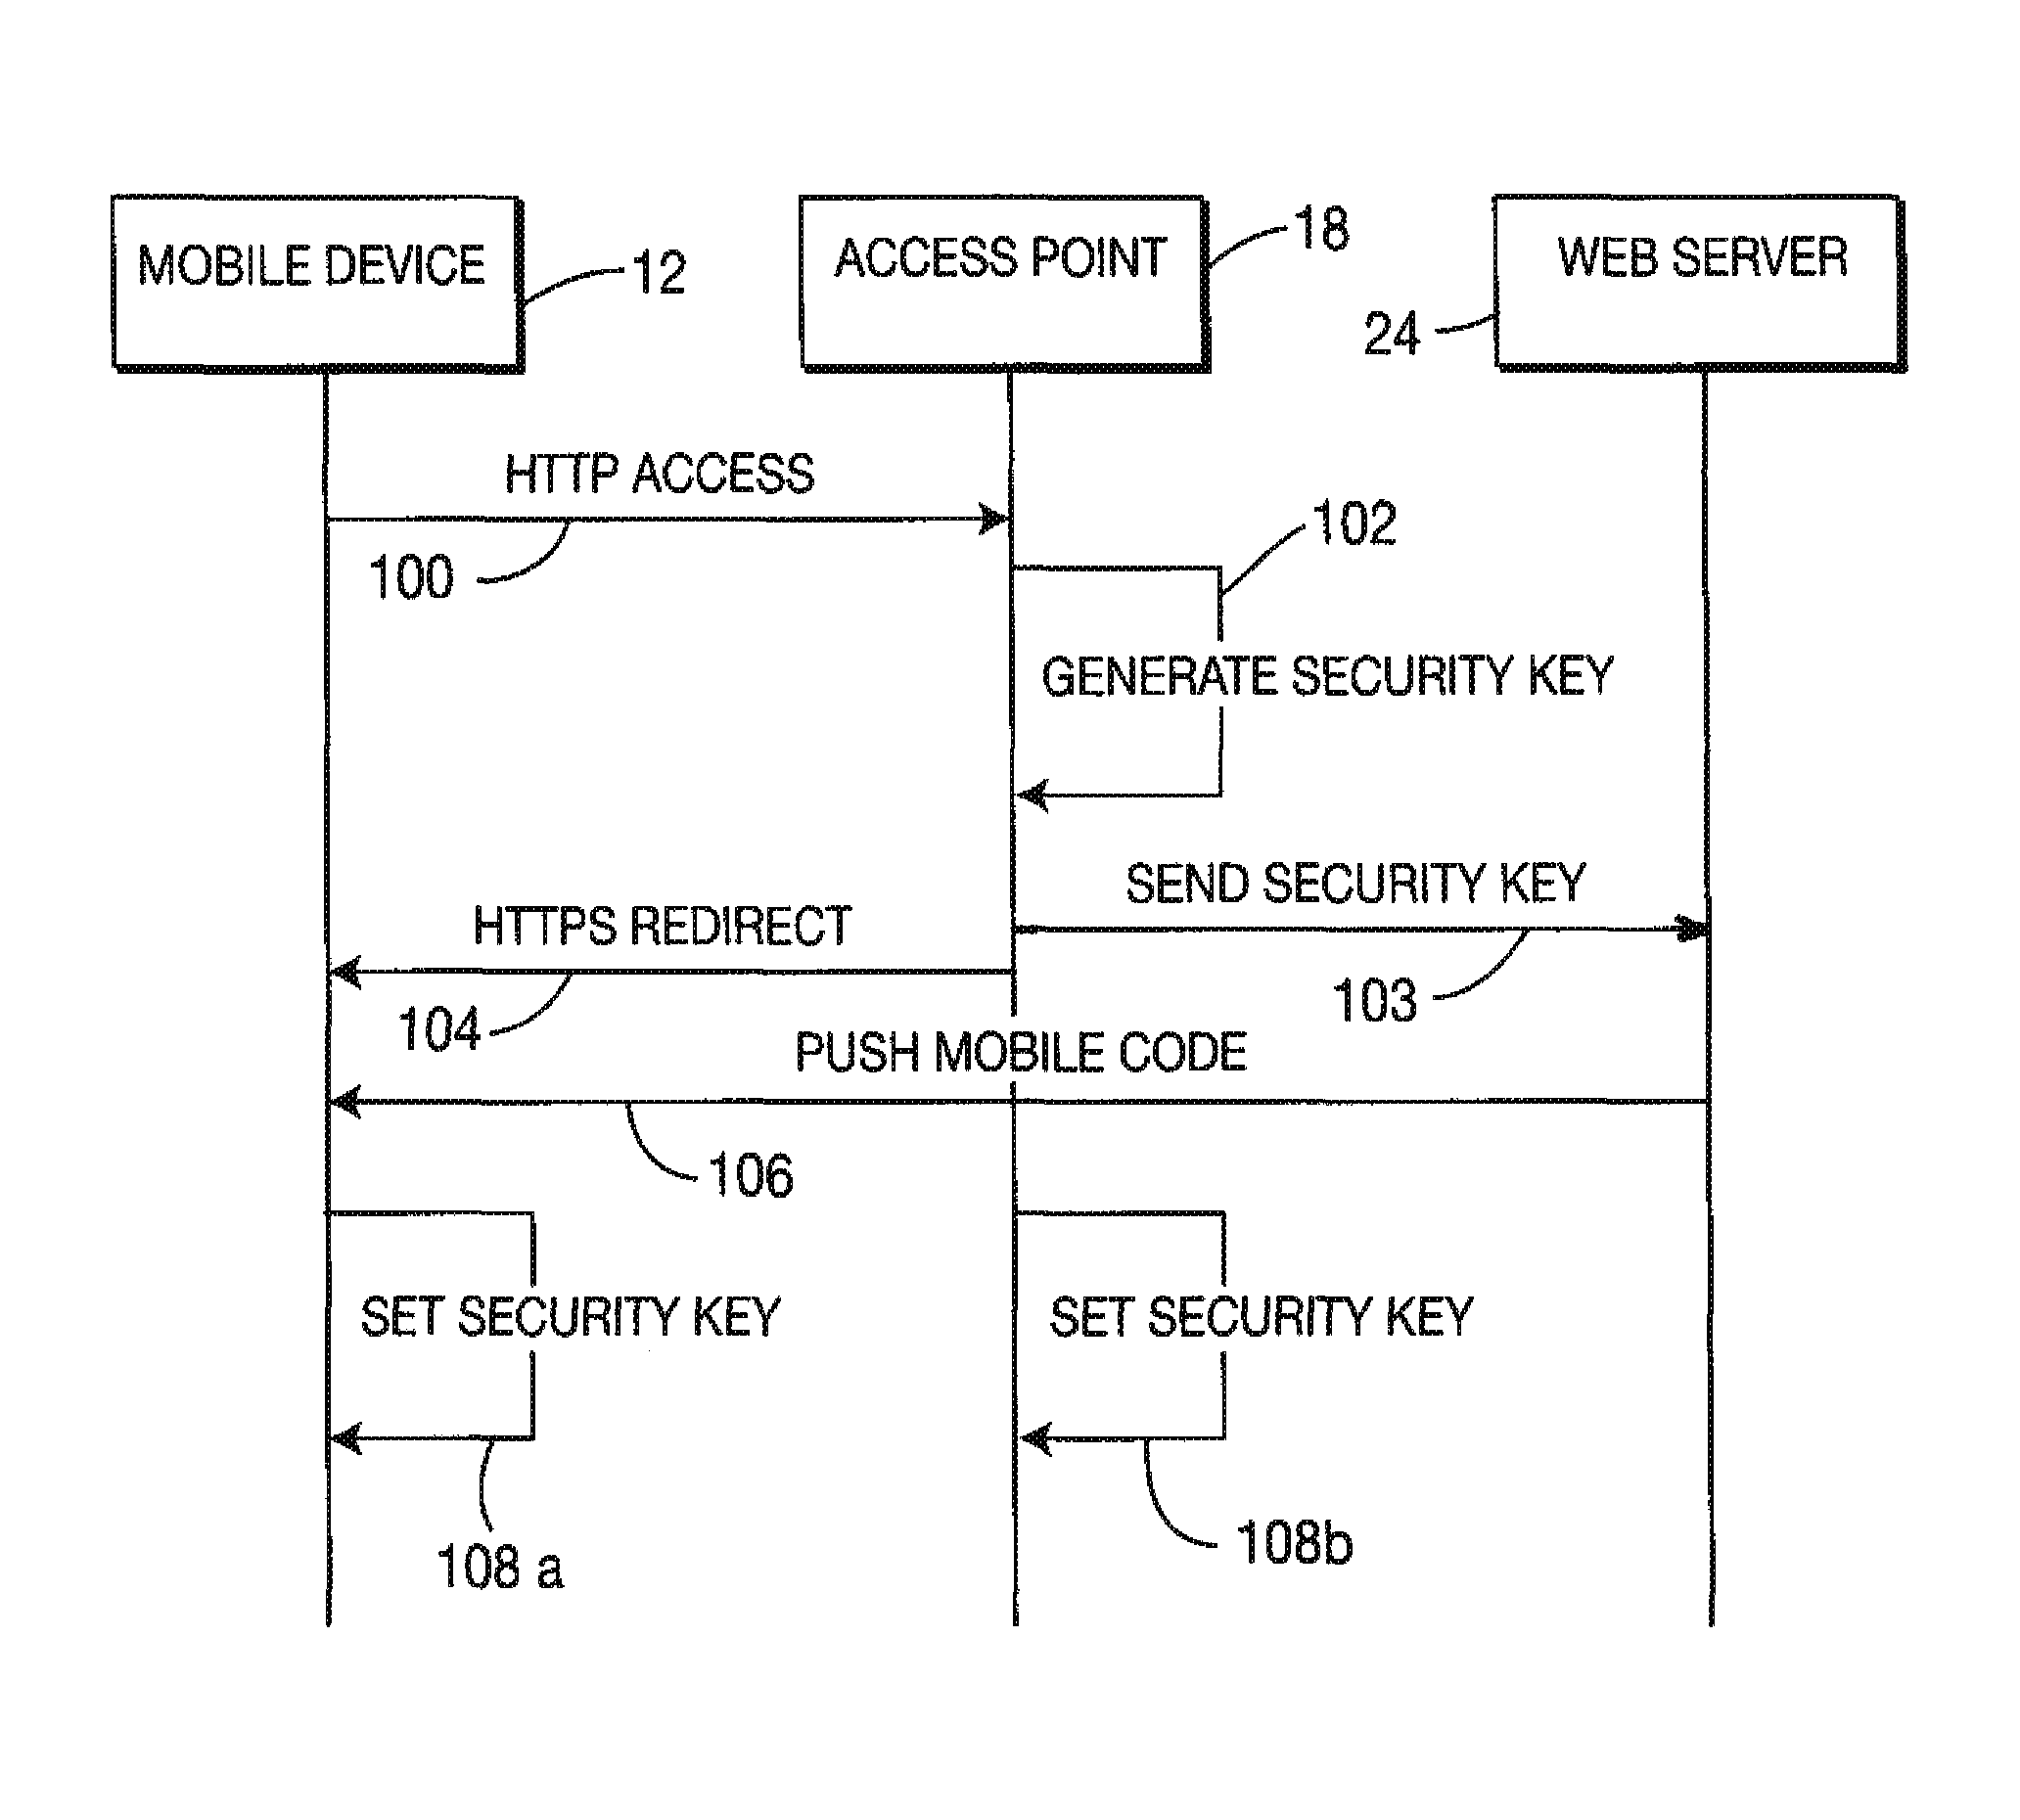 Method and apparatuses for secure, anonymous wireless LAN (WLAN) access